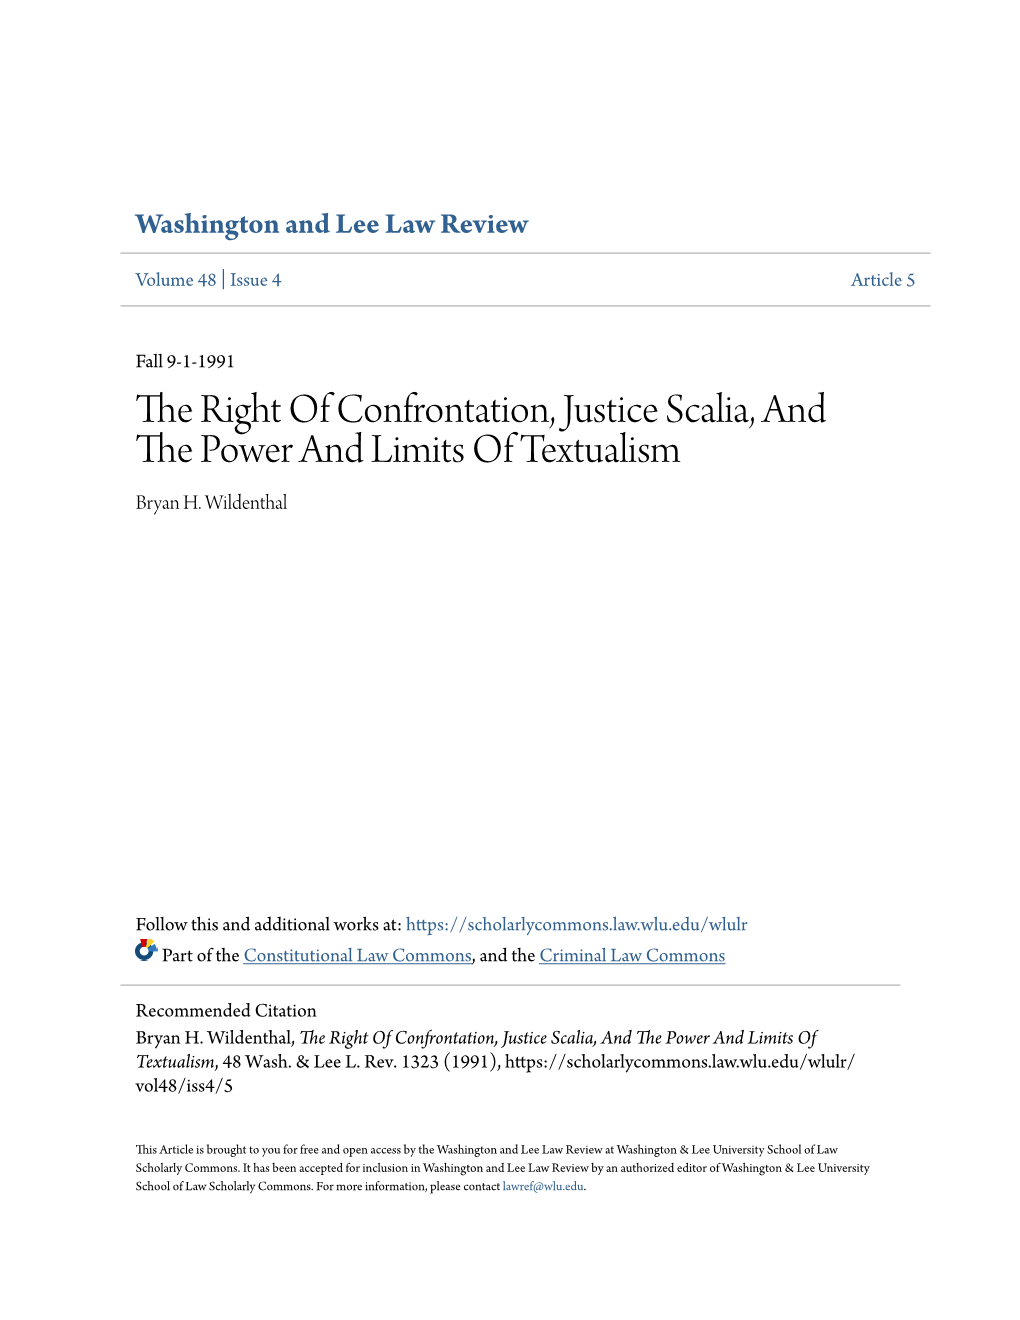 The Right of Confrontation, Justice Scalia, and the Power and Limits of Textualism, 48 Wash